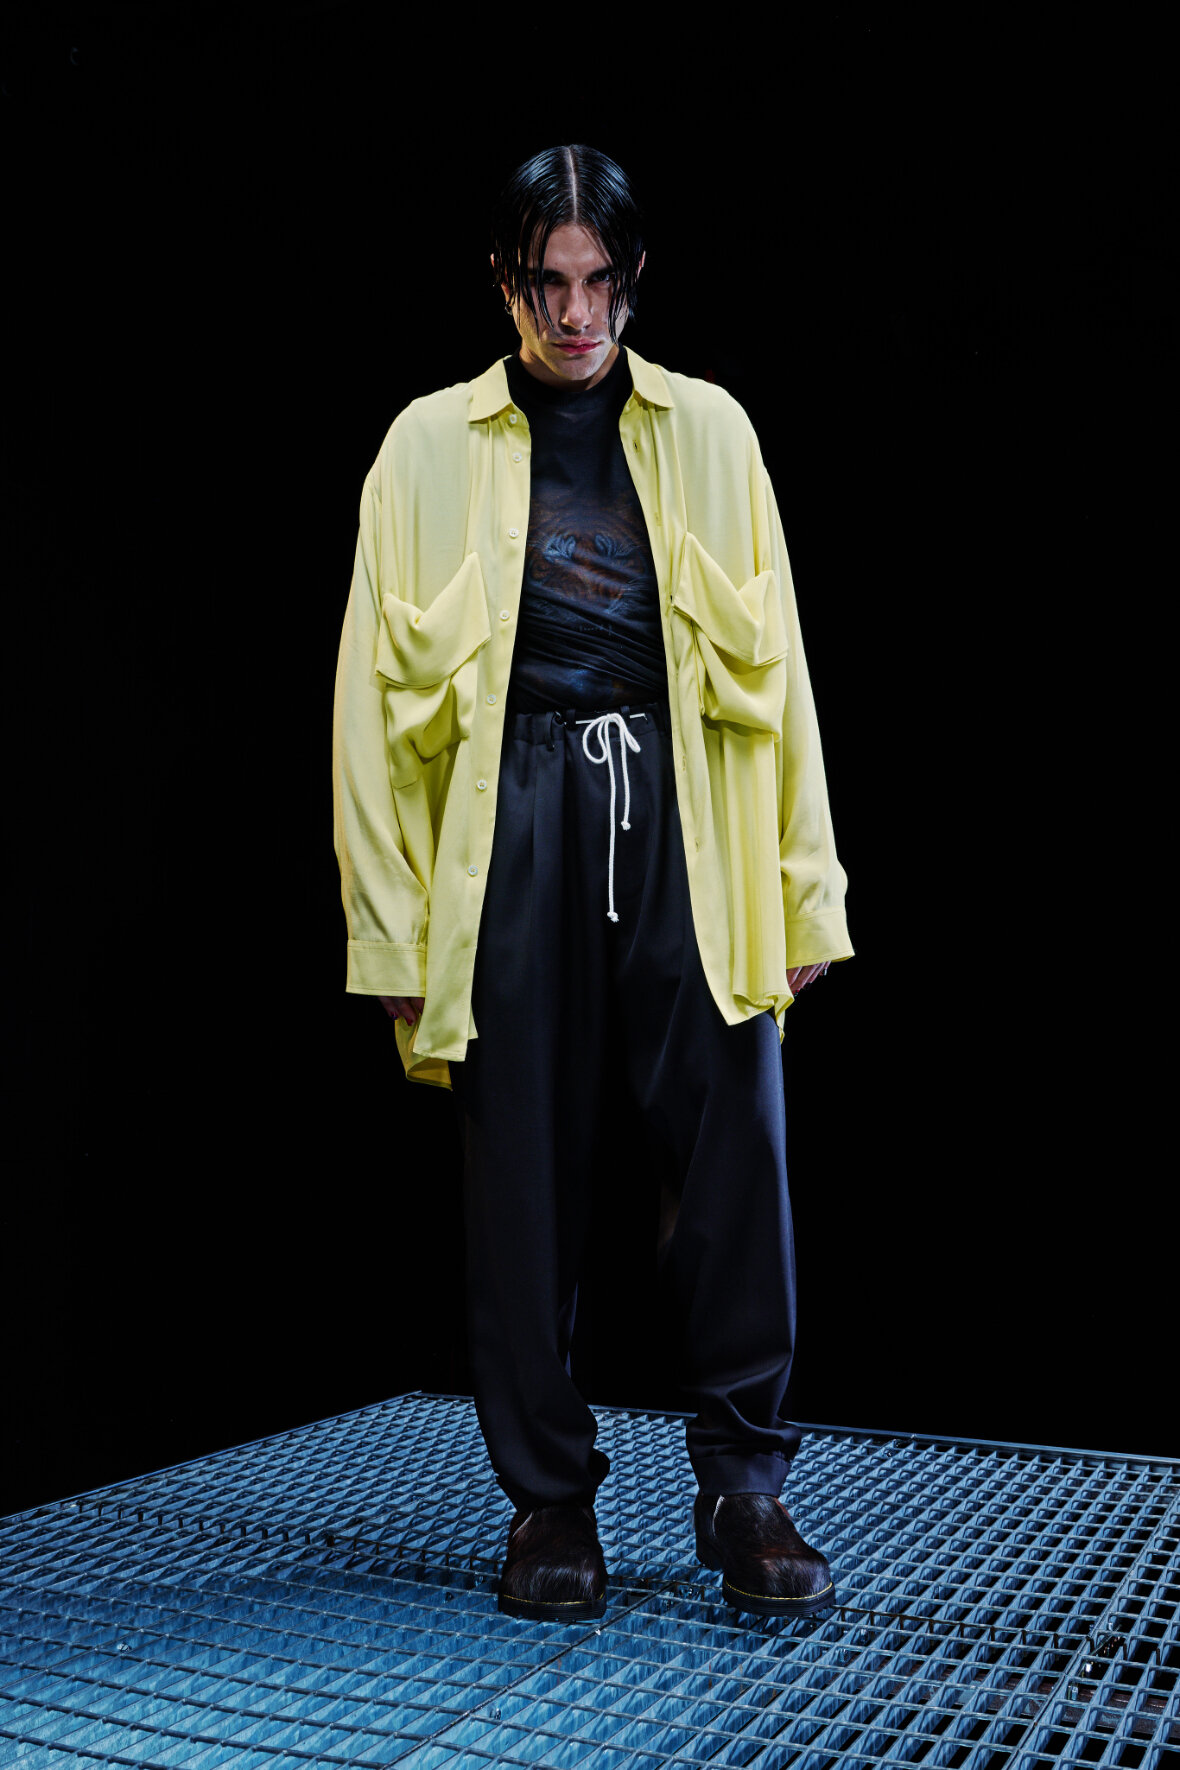  Model wears oversized yellow jacket over dark shirt and pants for Magliano's Spring/Summer 2022 collection for Milan Fashion Week. 